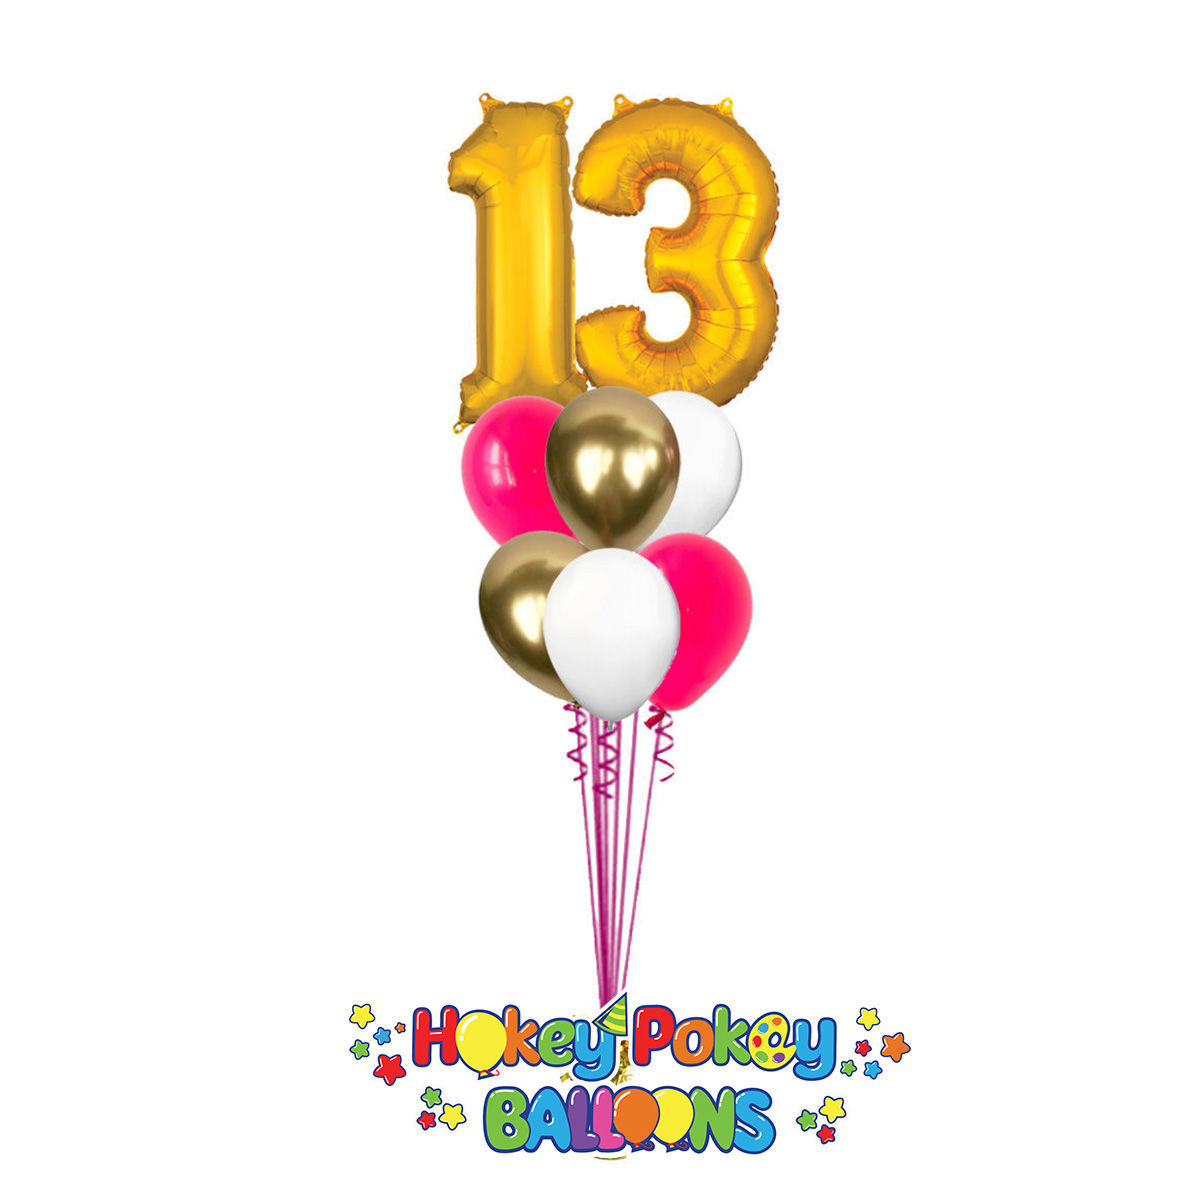 Picture of 11 Inch Helium Balloon Bouquet of 6 with 2 foil Numbers